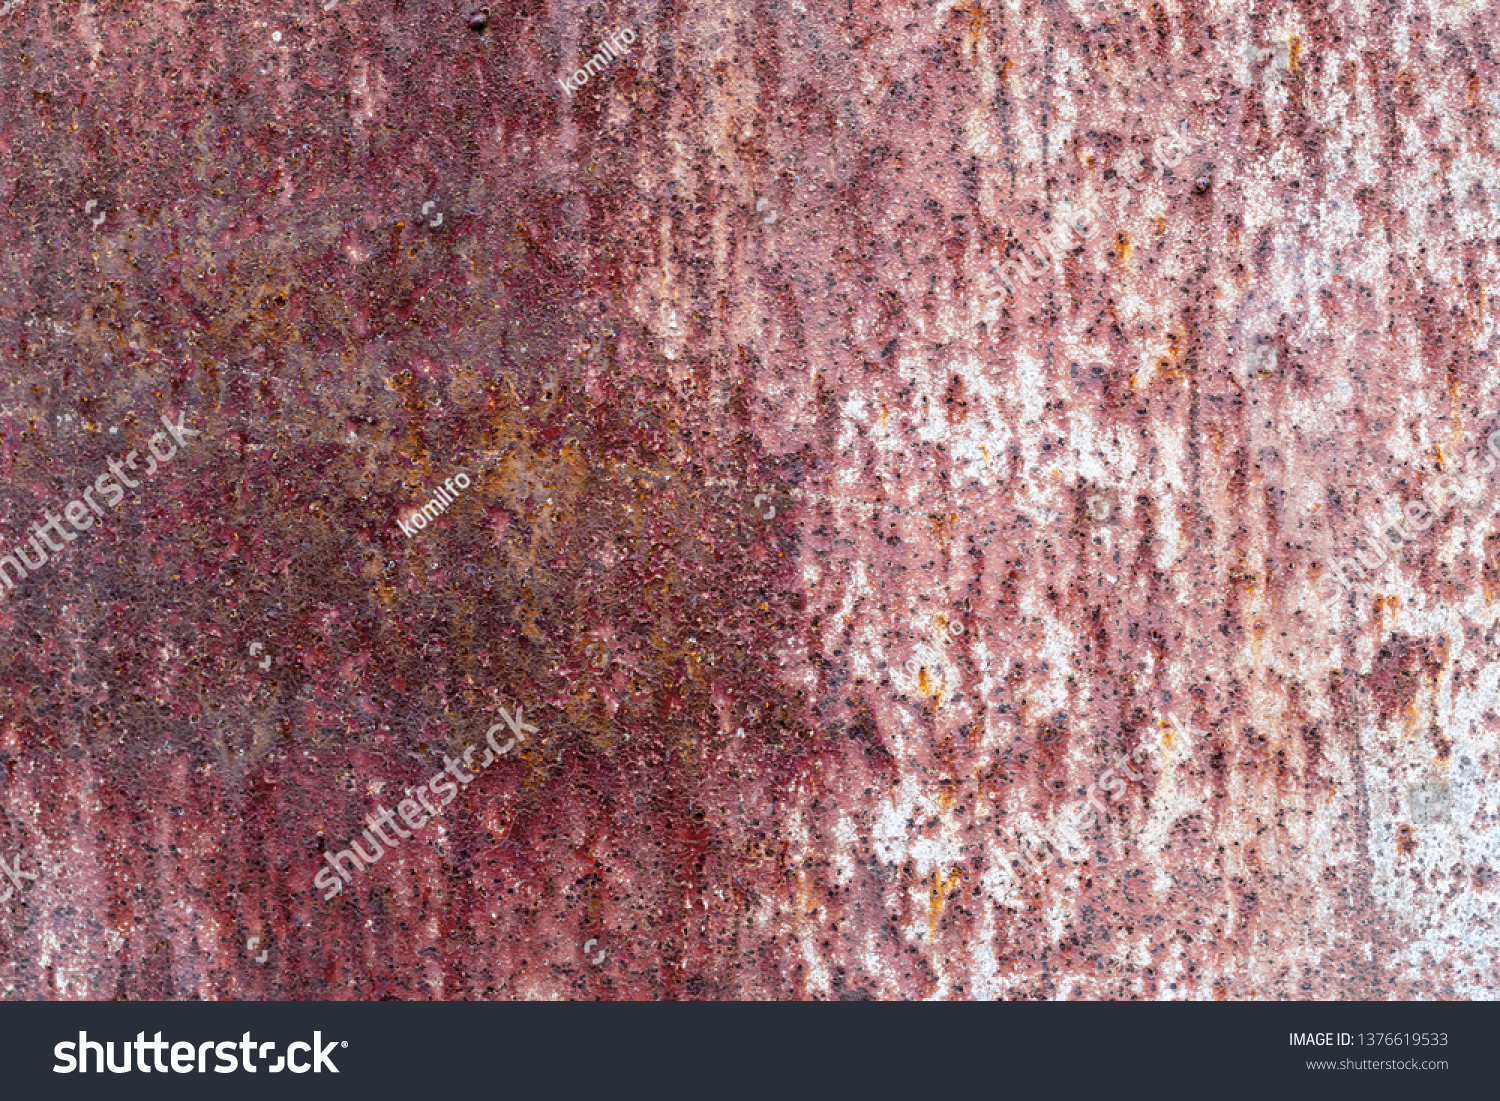 The old rusty surface of metal damaged by bad weather. Spots and smudges of paint. Ready photo background. Macro. #1376619533